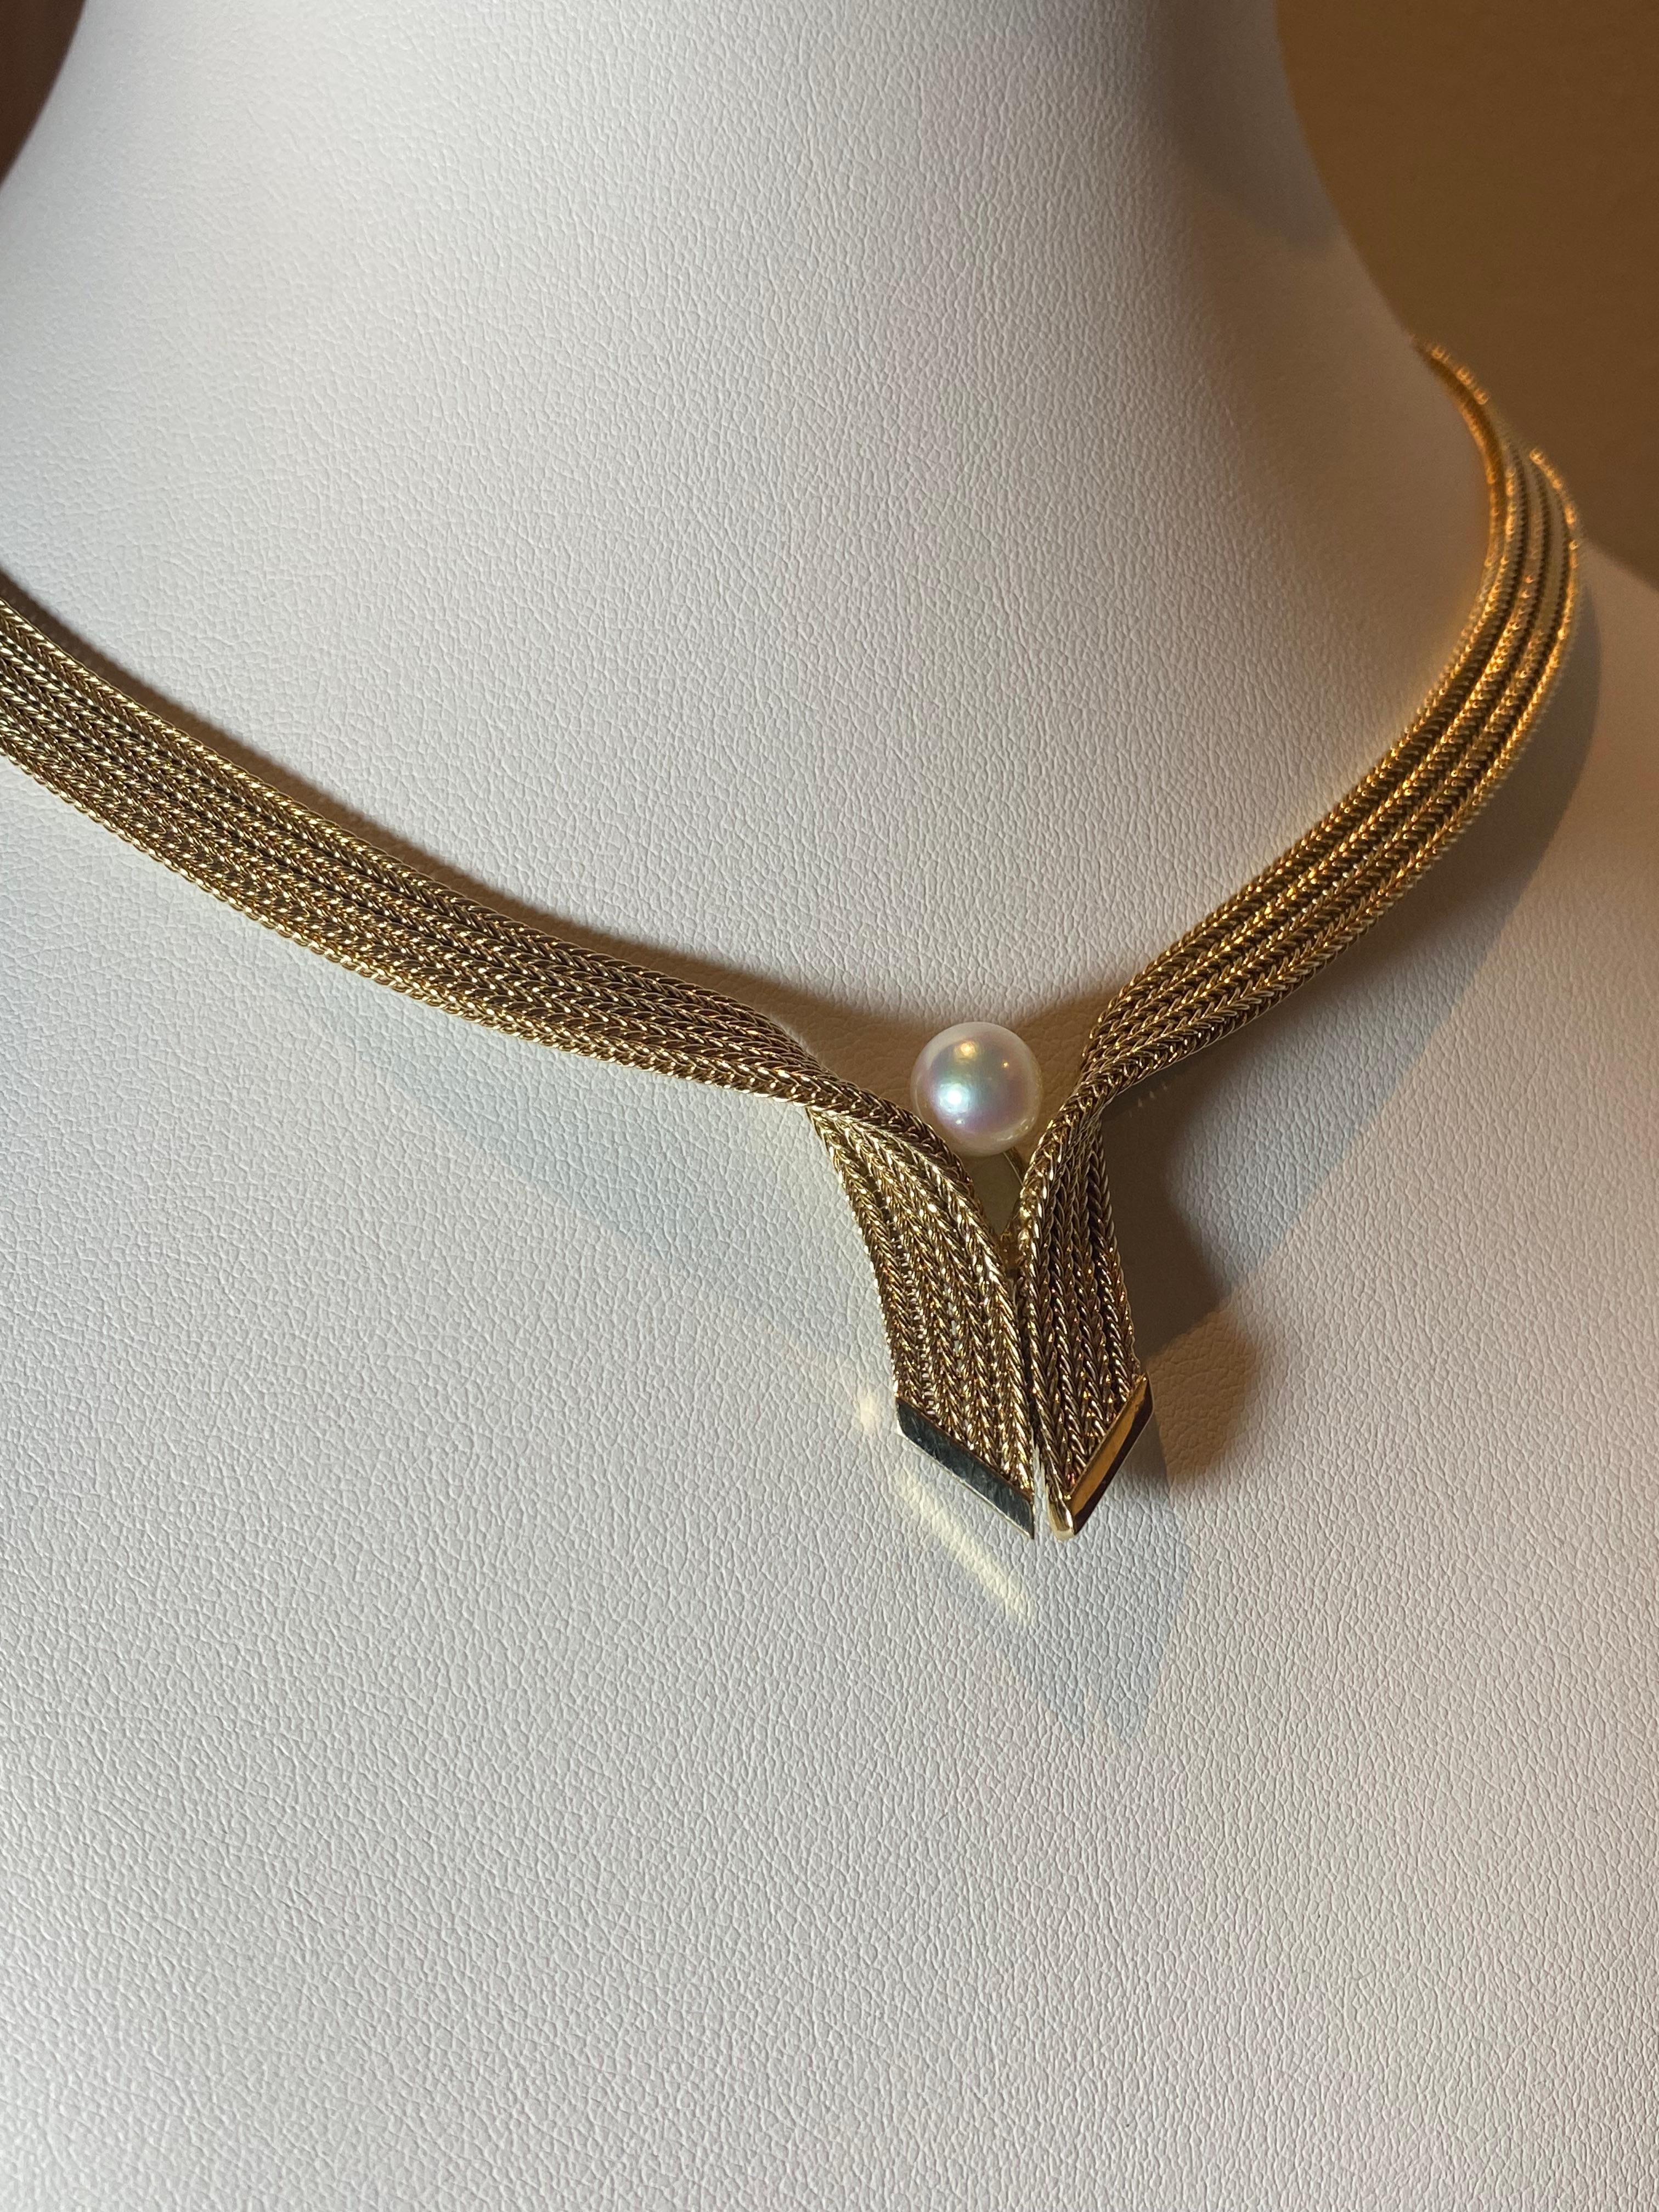 Round Cut Grossé Germany 14K Yellow Gold & 10mm South Sea Pearl Retro Necklace, c1963 For Sale